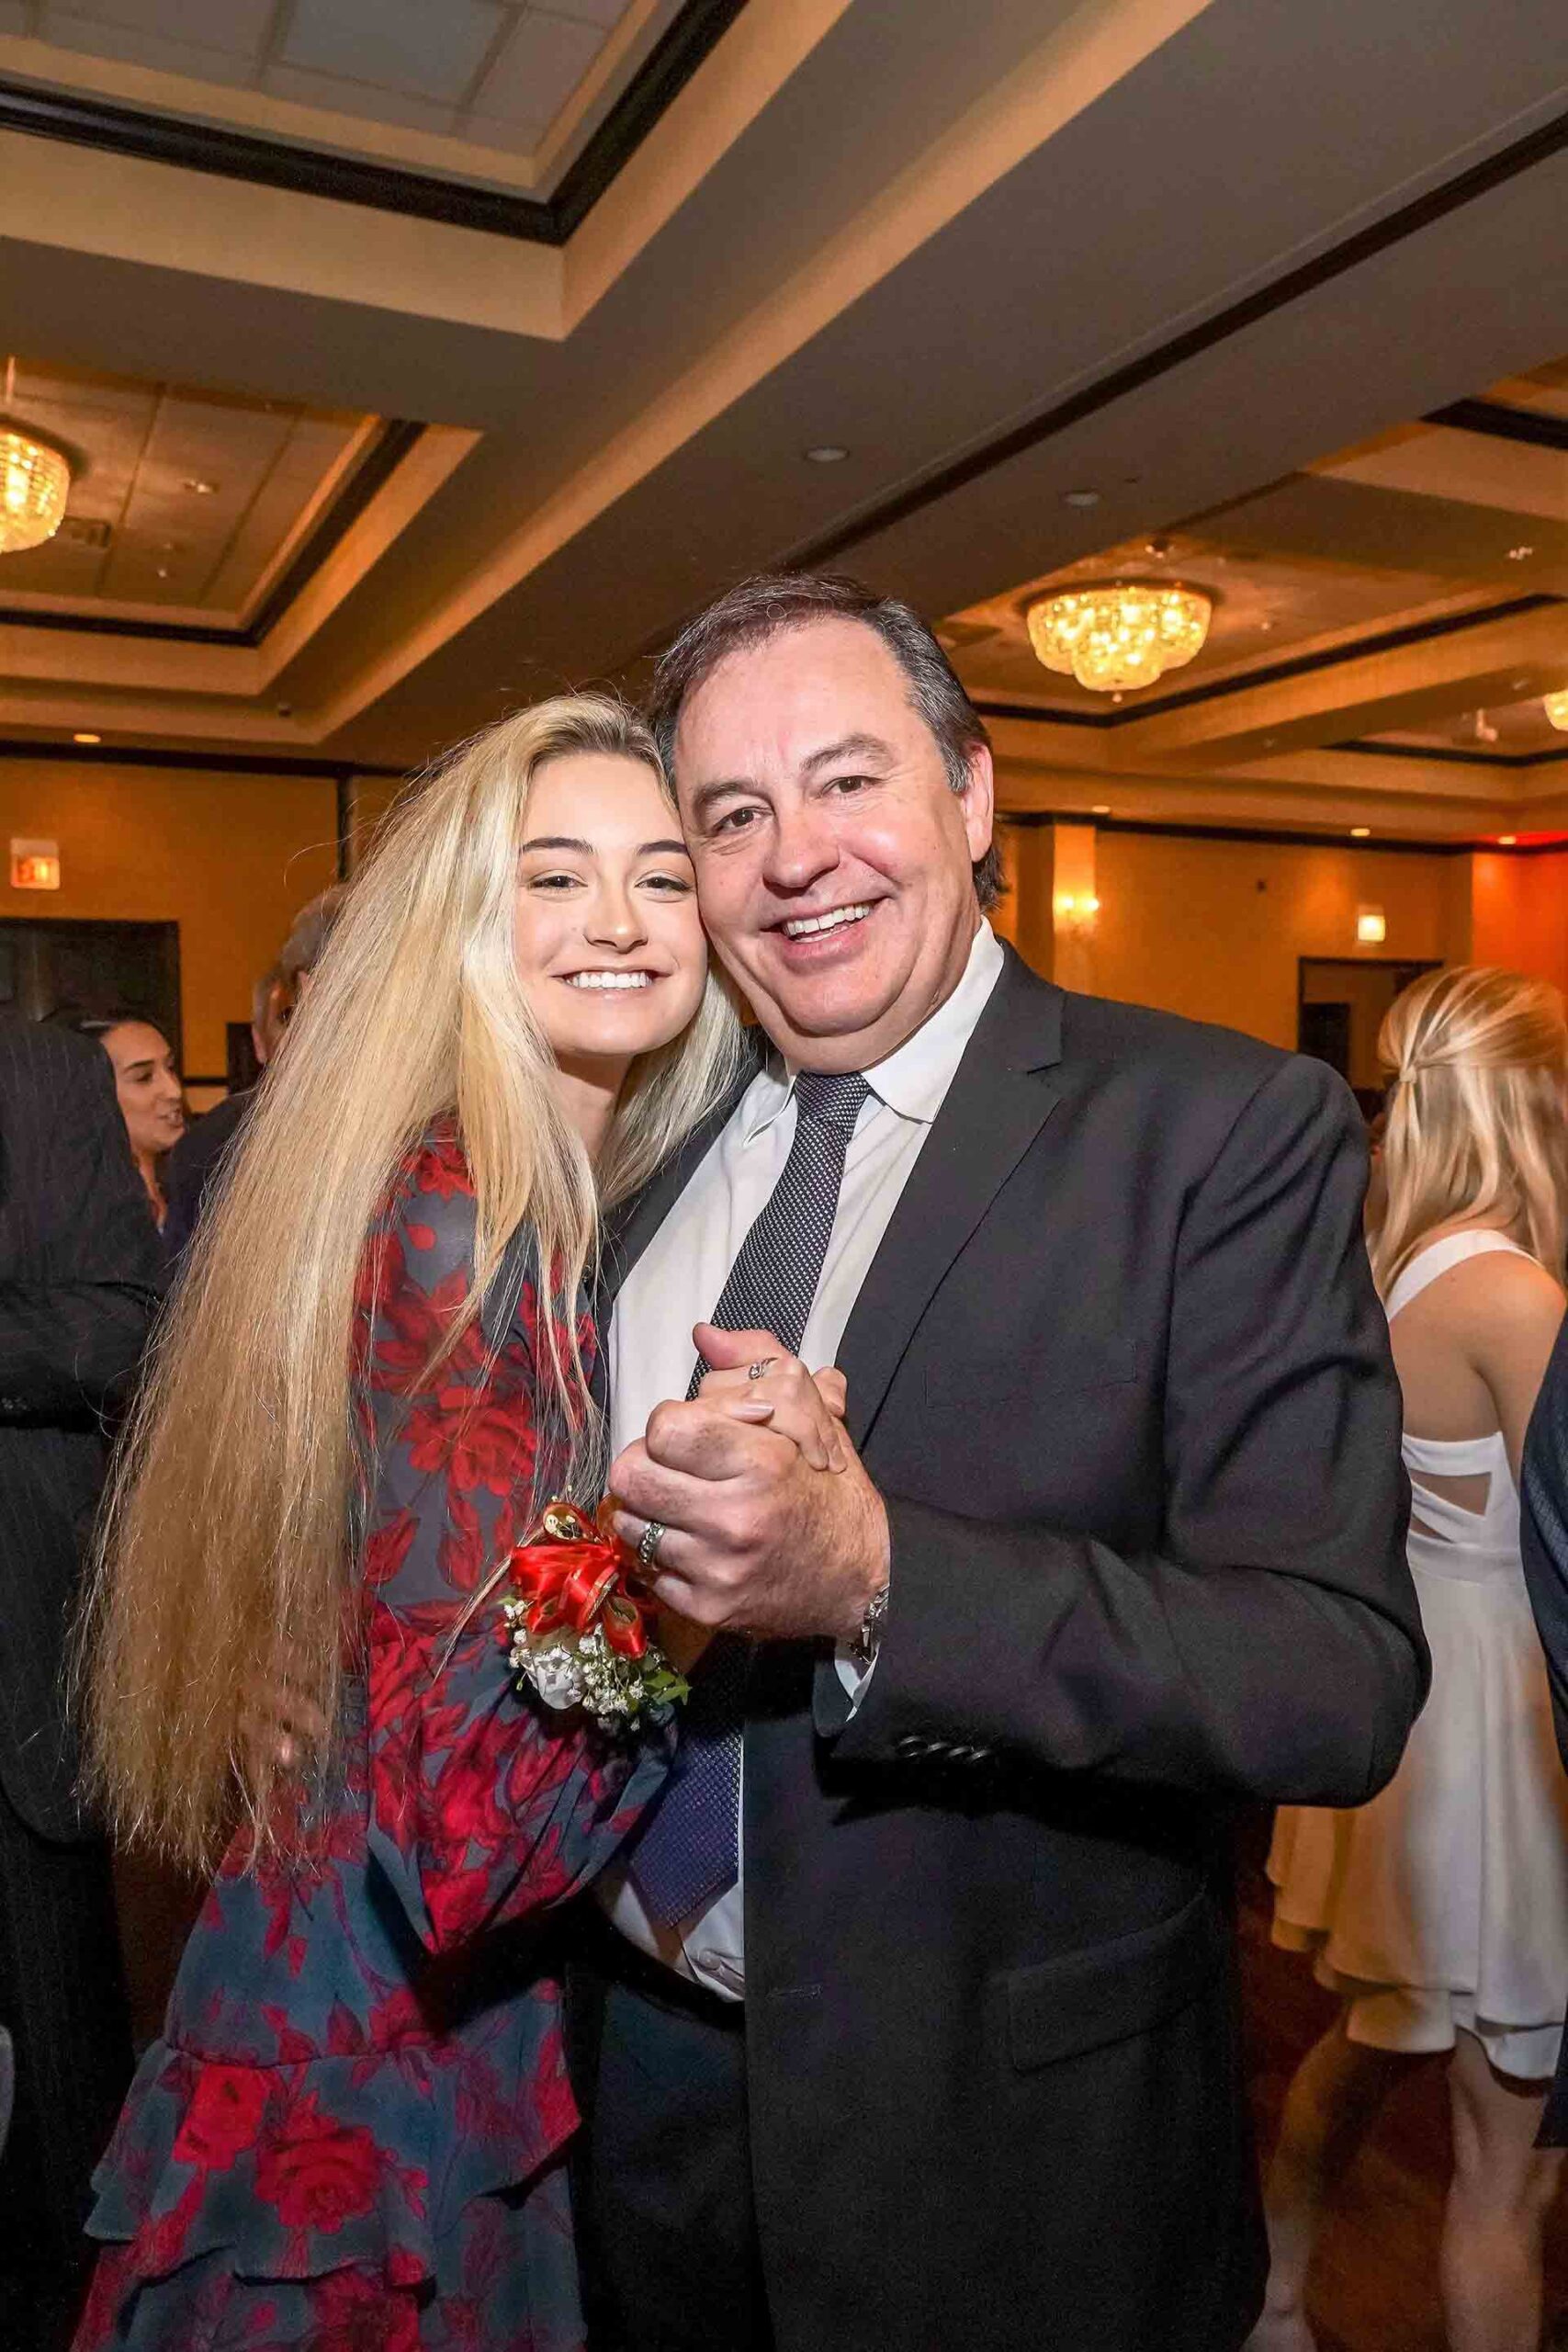 father-daughter-dance-2019-girl-with-red-flower-dress-smiling-with-father